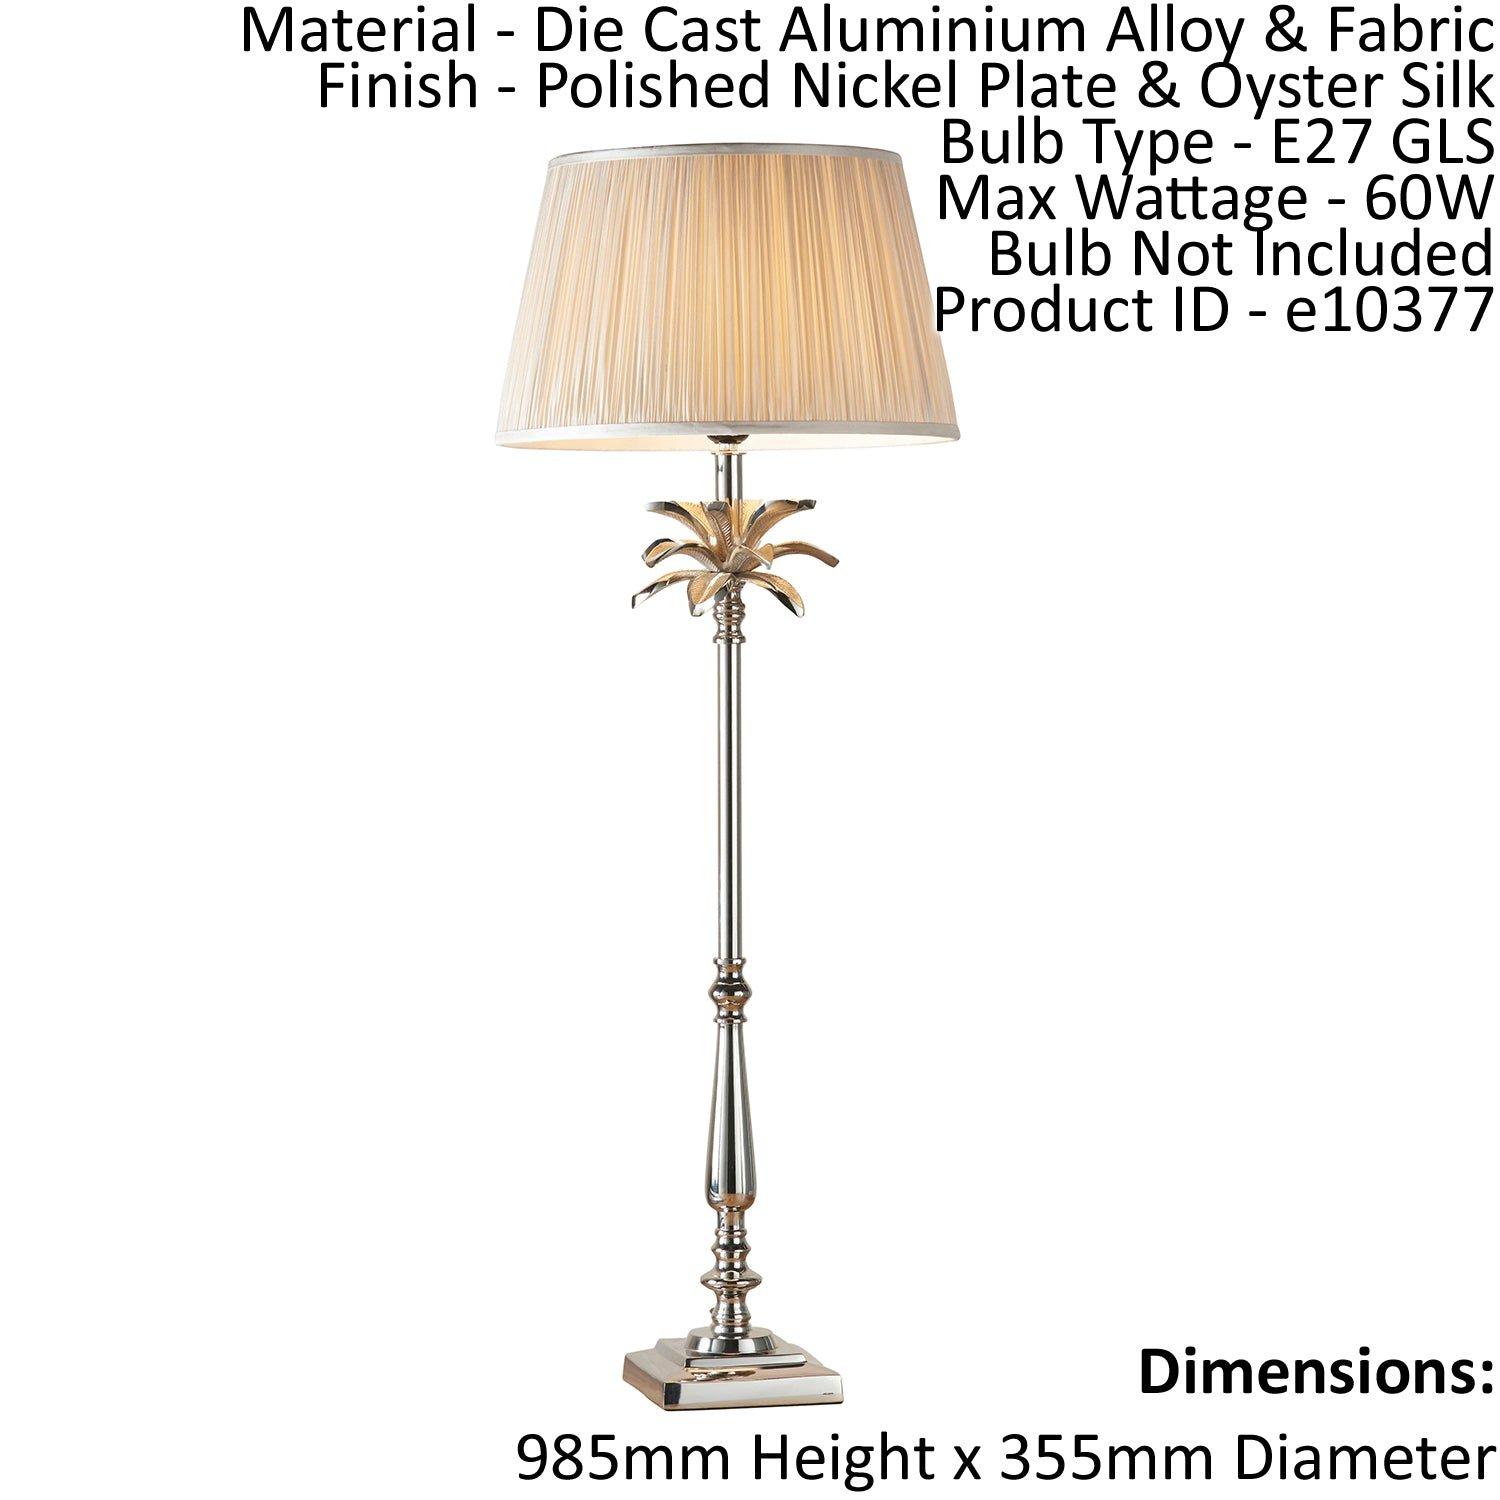 Table Lamp Polished Nickel Plate & Oyster Silk 60W E27 Base & Shade e10377